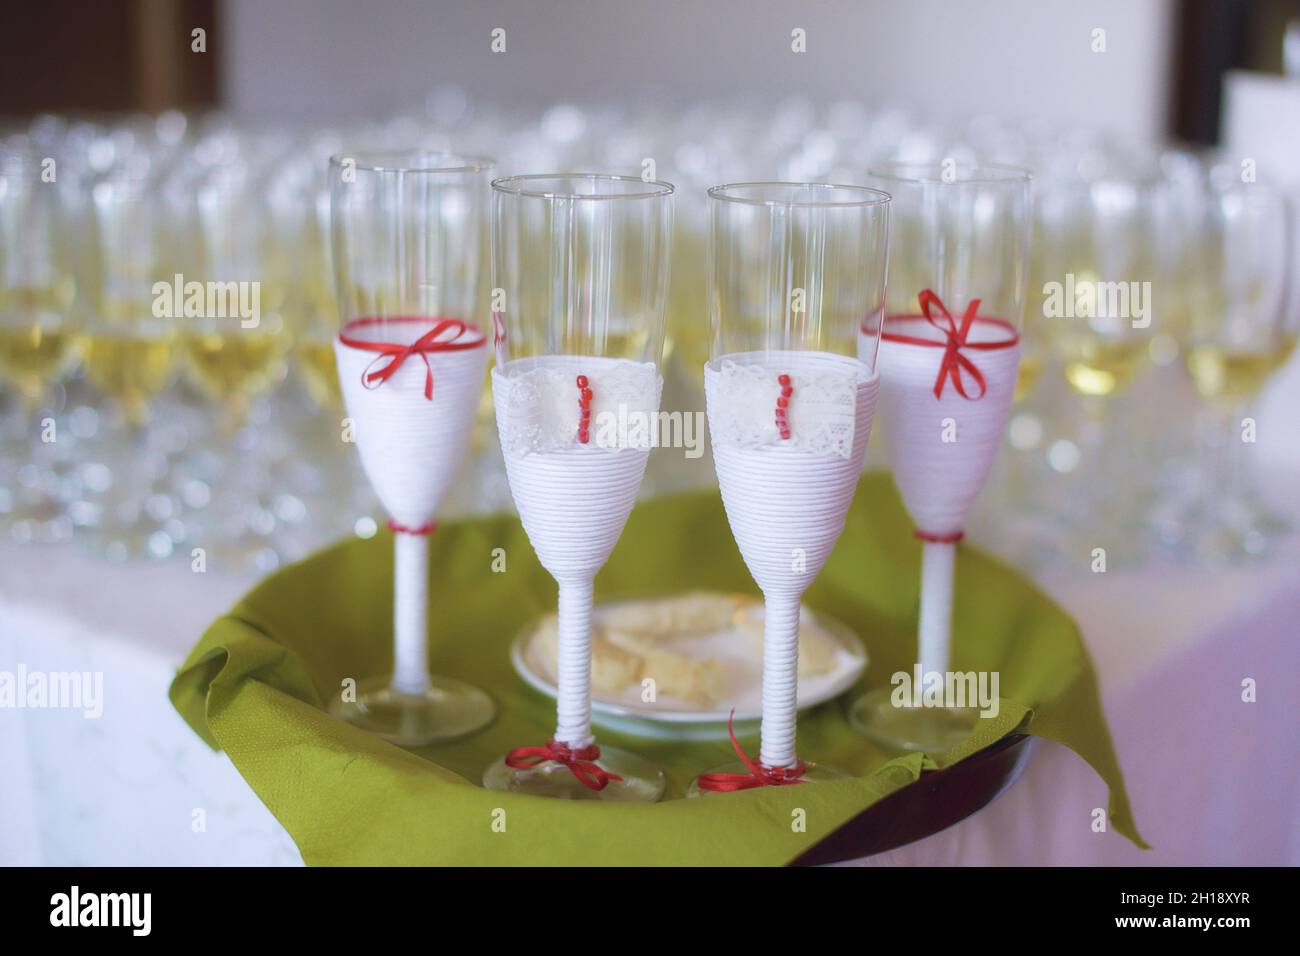 Full glasses of bubbly or champagne with four decorated ones in the foreground set on a green tray selected for bride, groom and witnesses Stock Photo